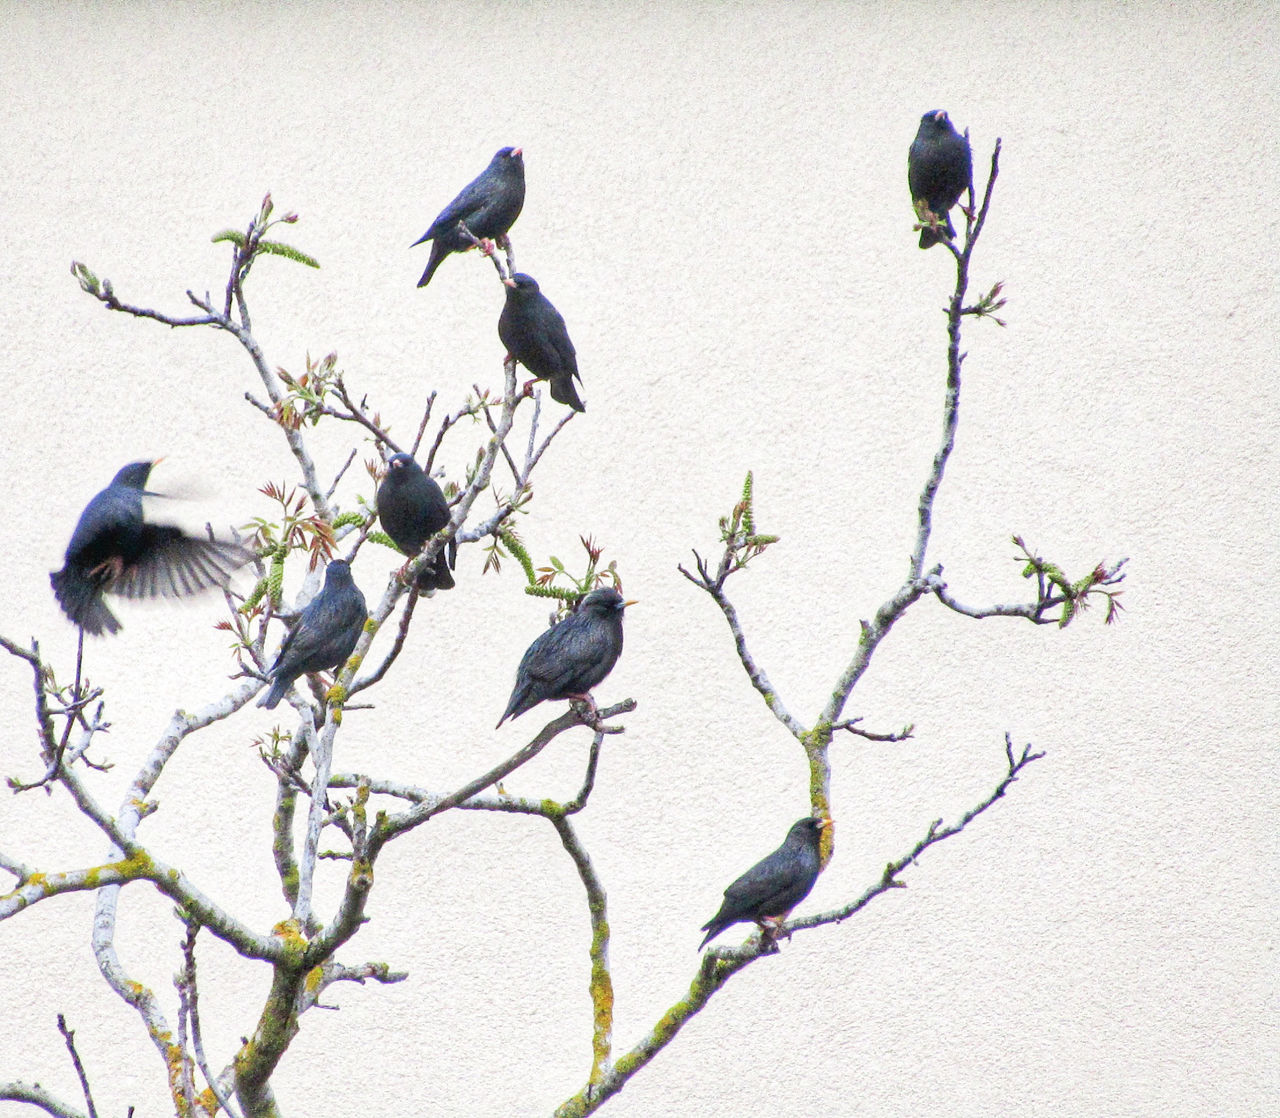 BIRDS PERCHING ON A PLANT